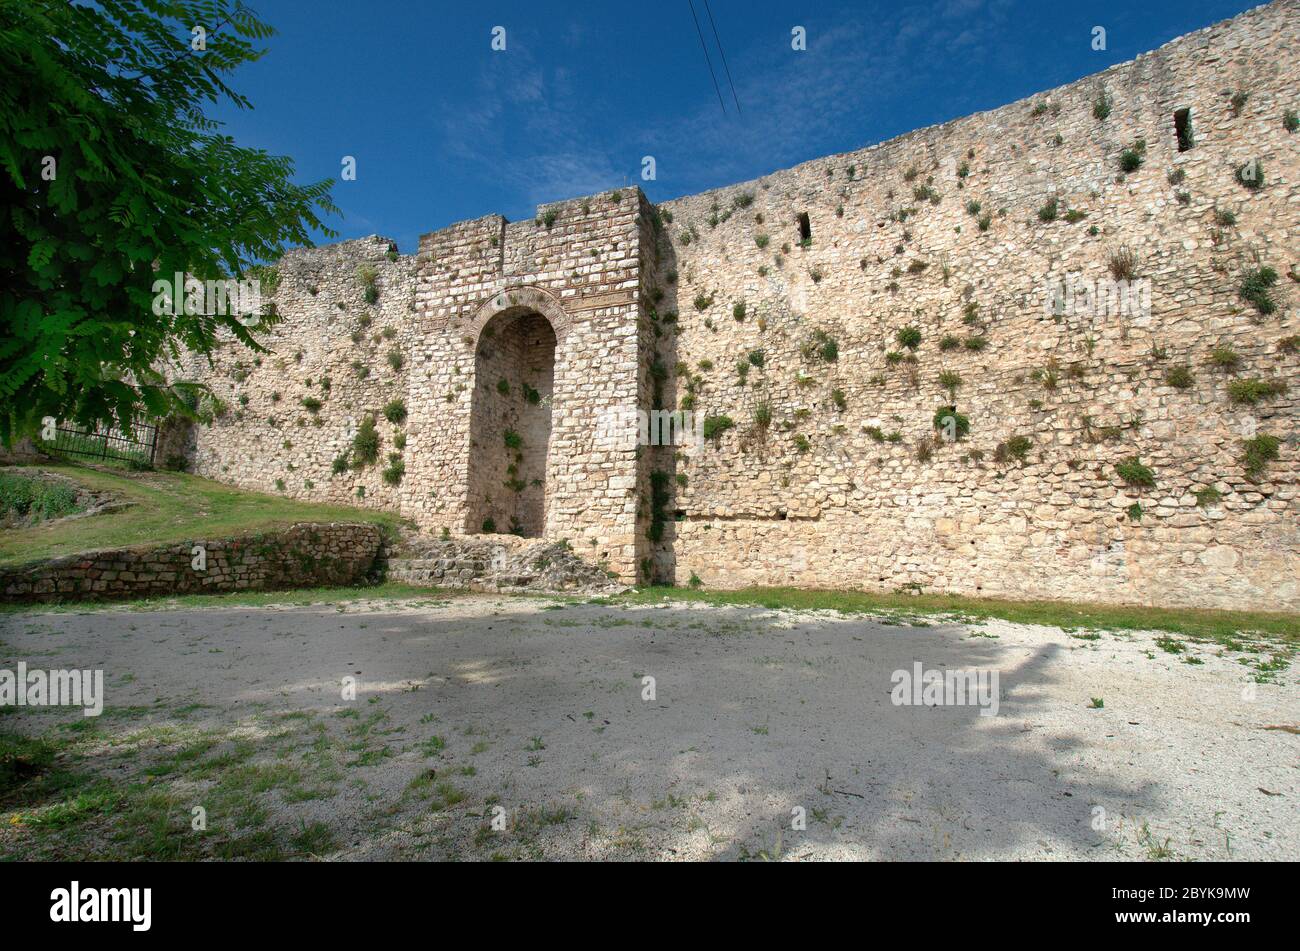 Greece, Ioannina, part of the fortified wall in the capital of Epirus Stock Photo